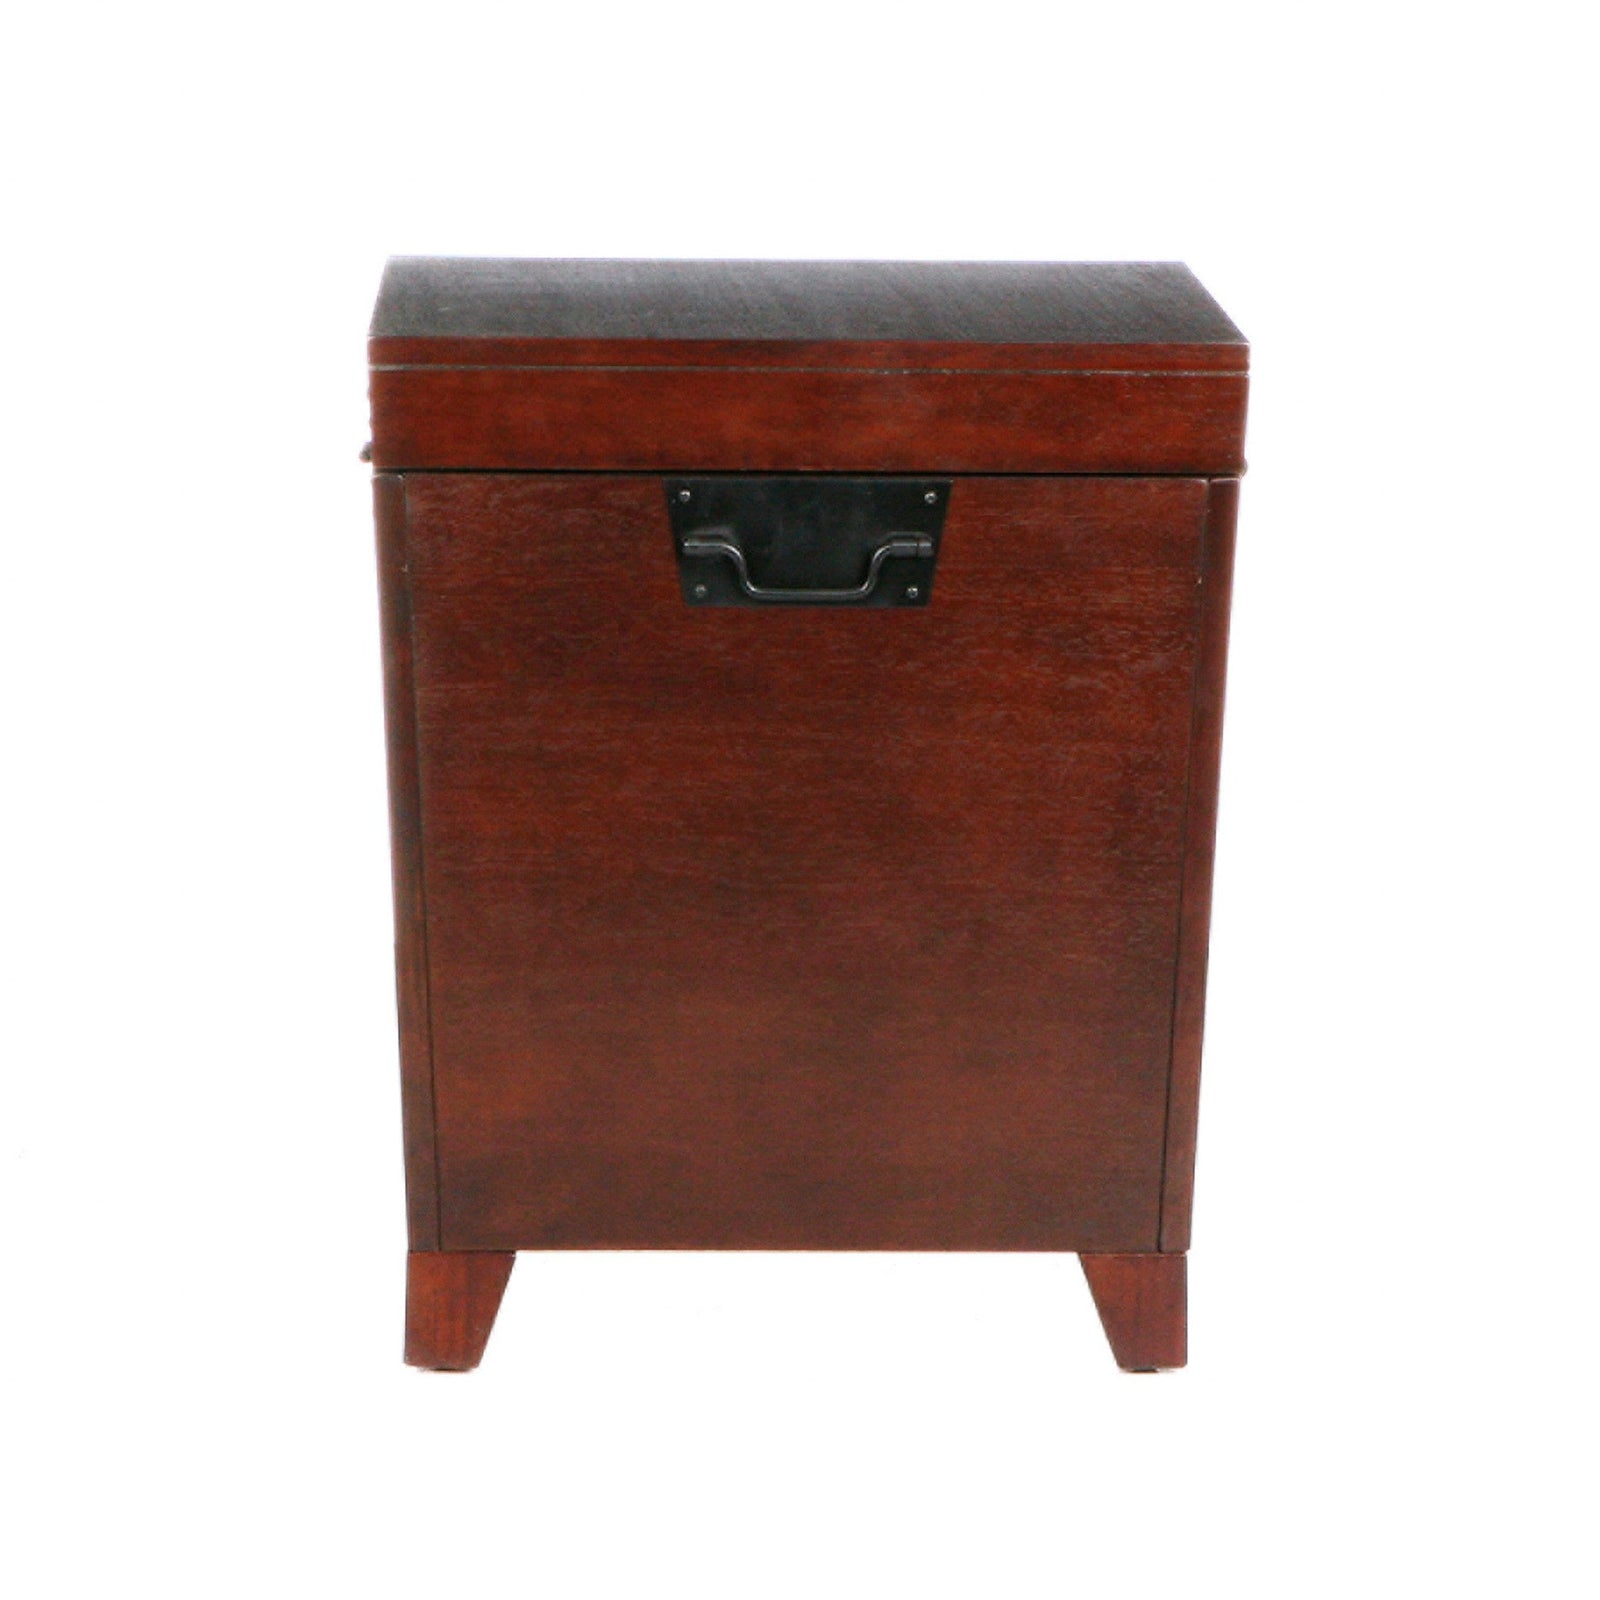 Brown Solid Wood Square End Table 24"